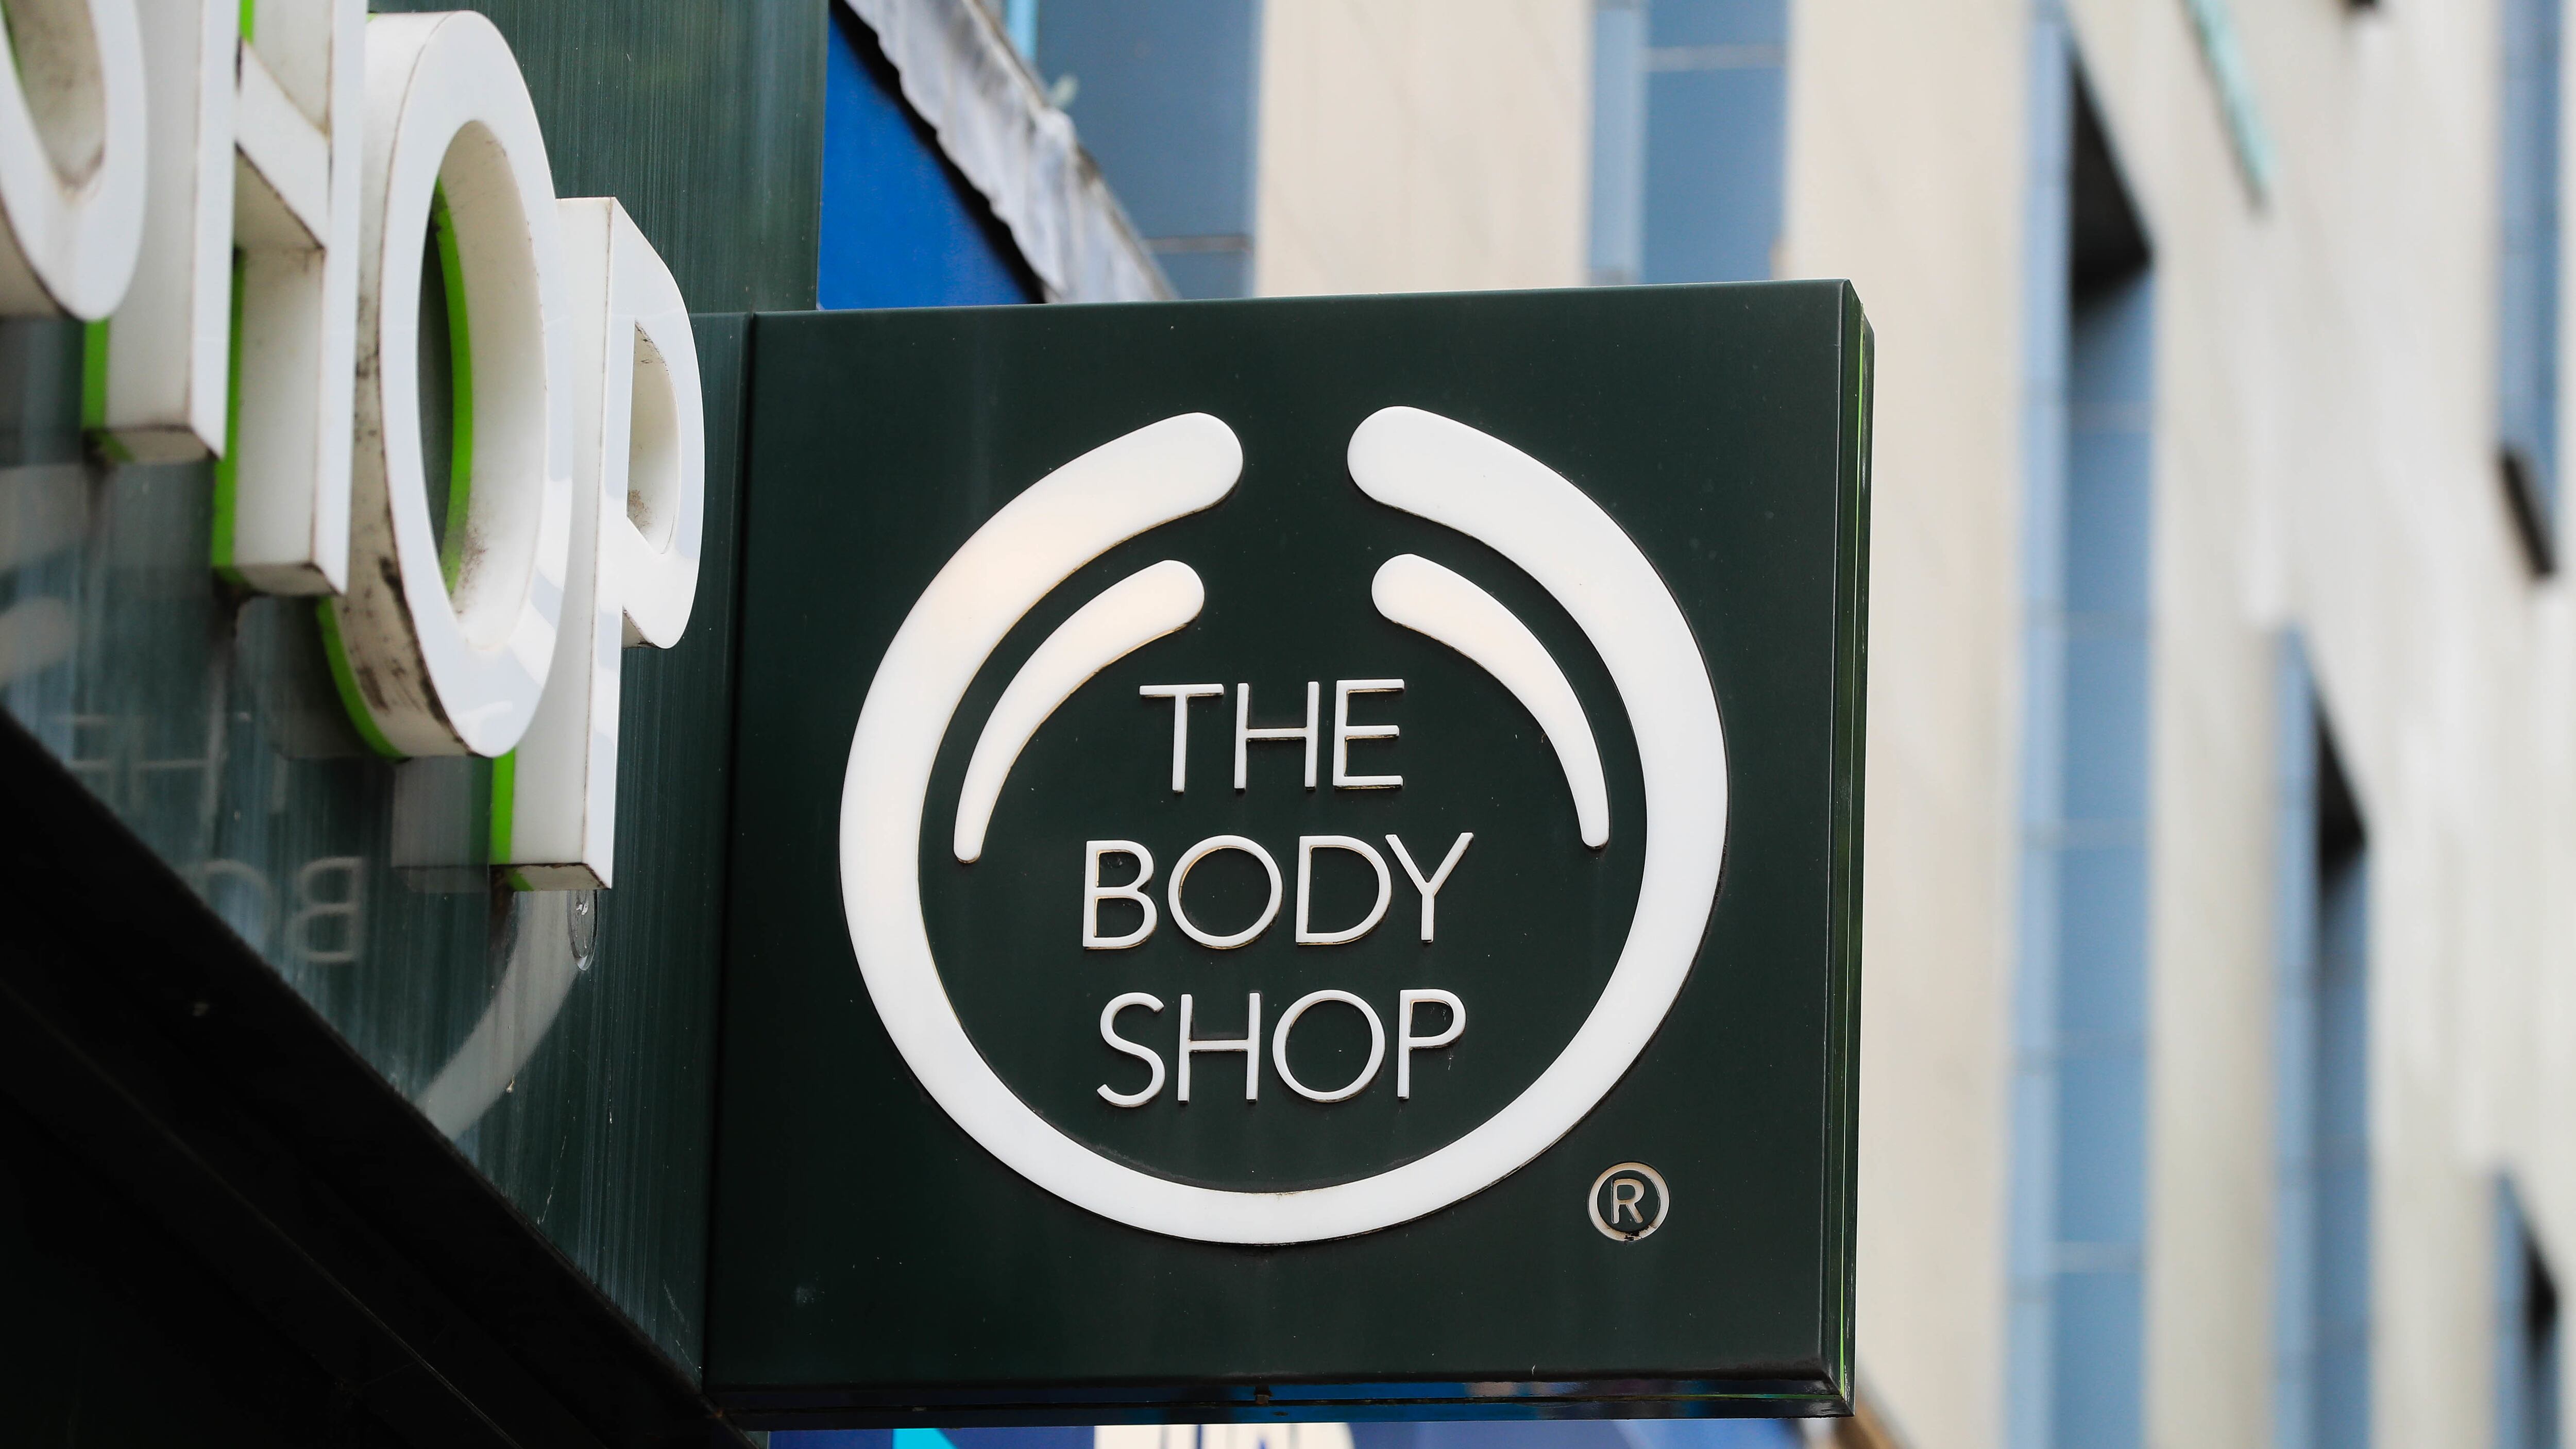 The Body Shop has more than 200 stores across the UK